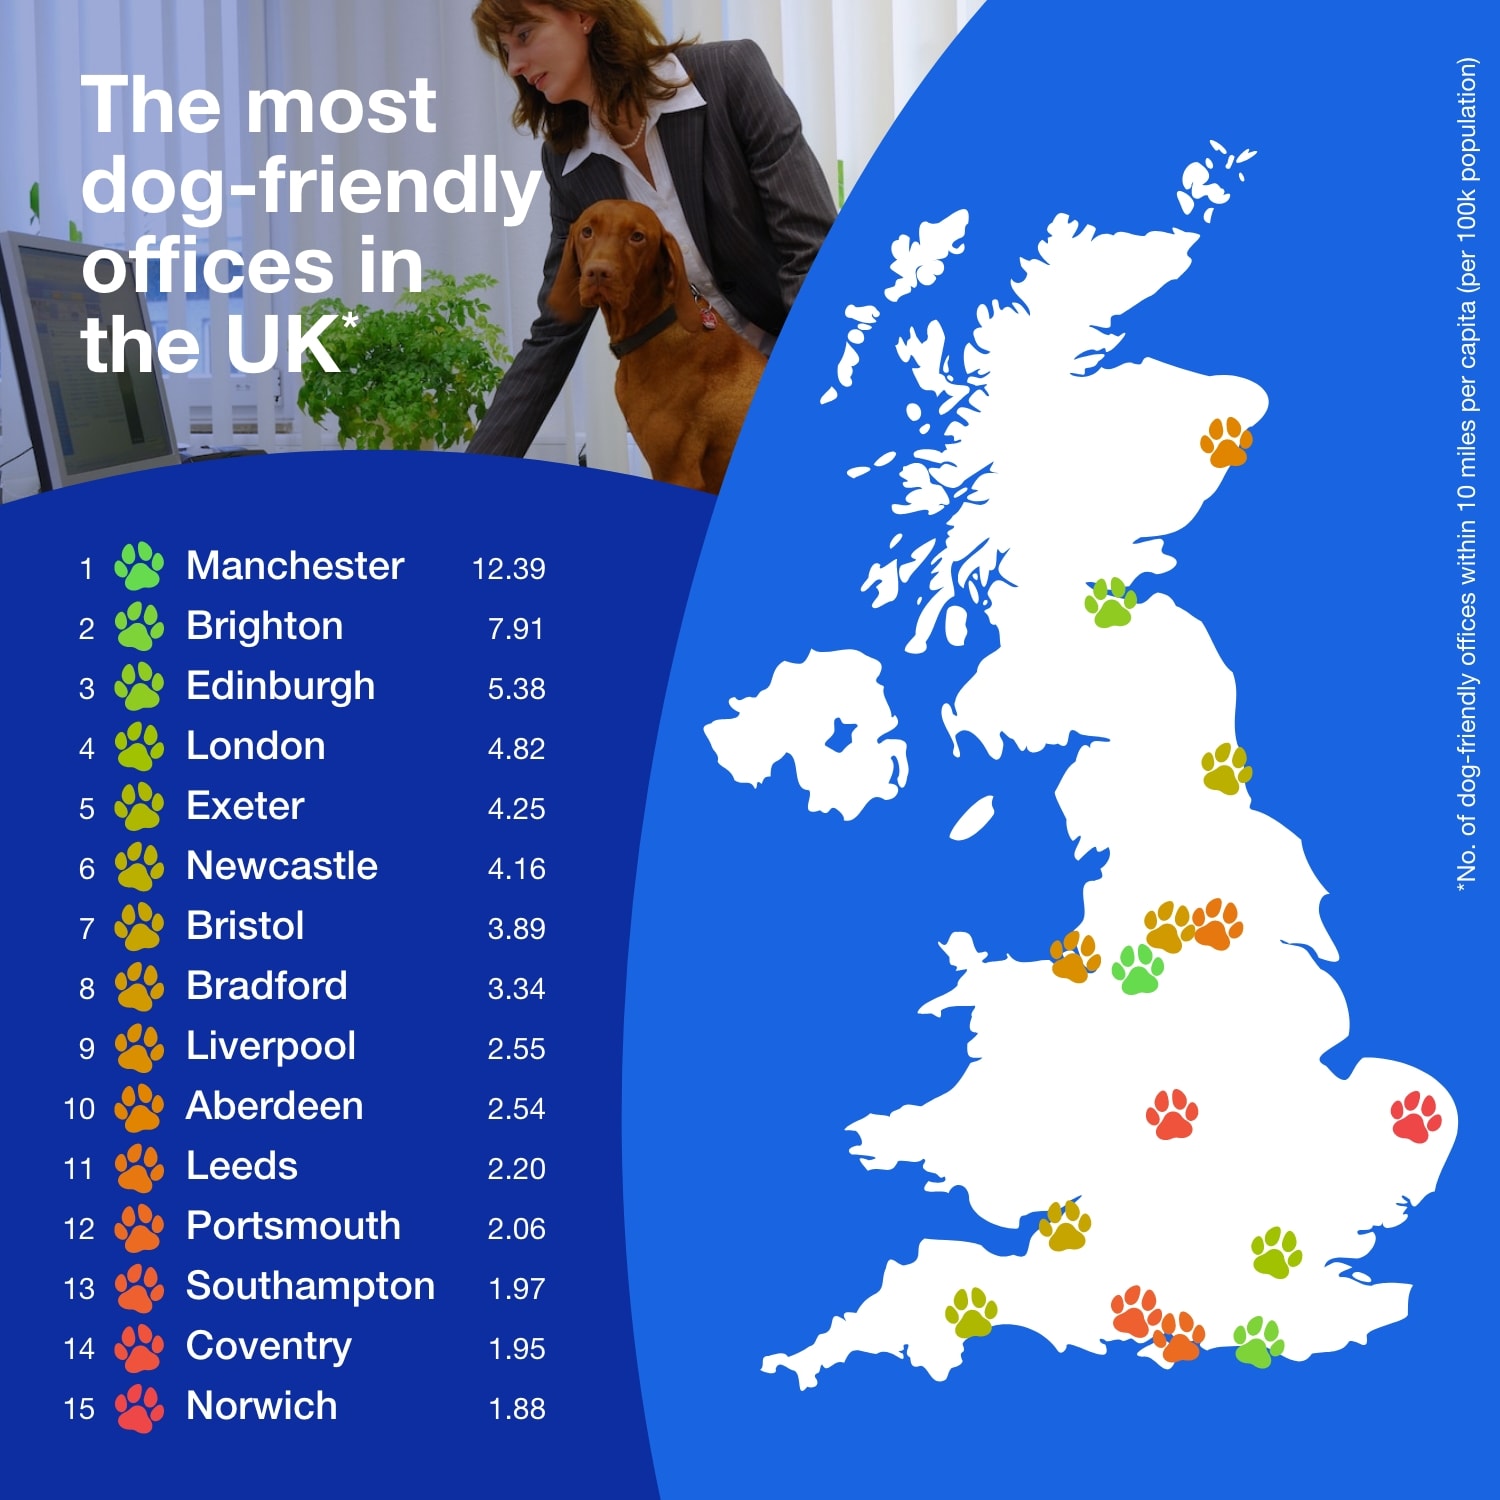 Infographic showing a map of the 15 most dog-friendly offices in the UK